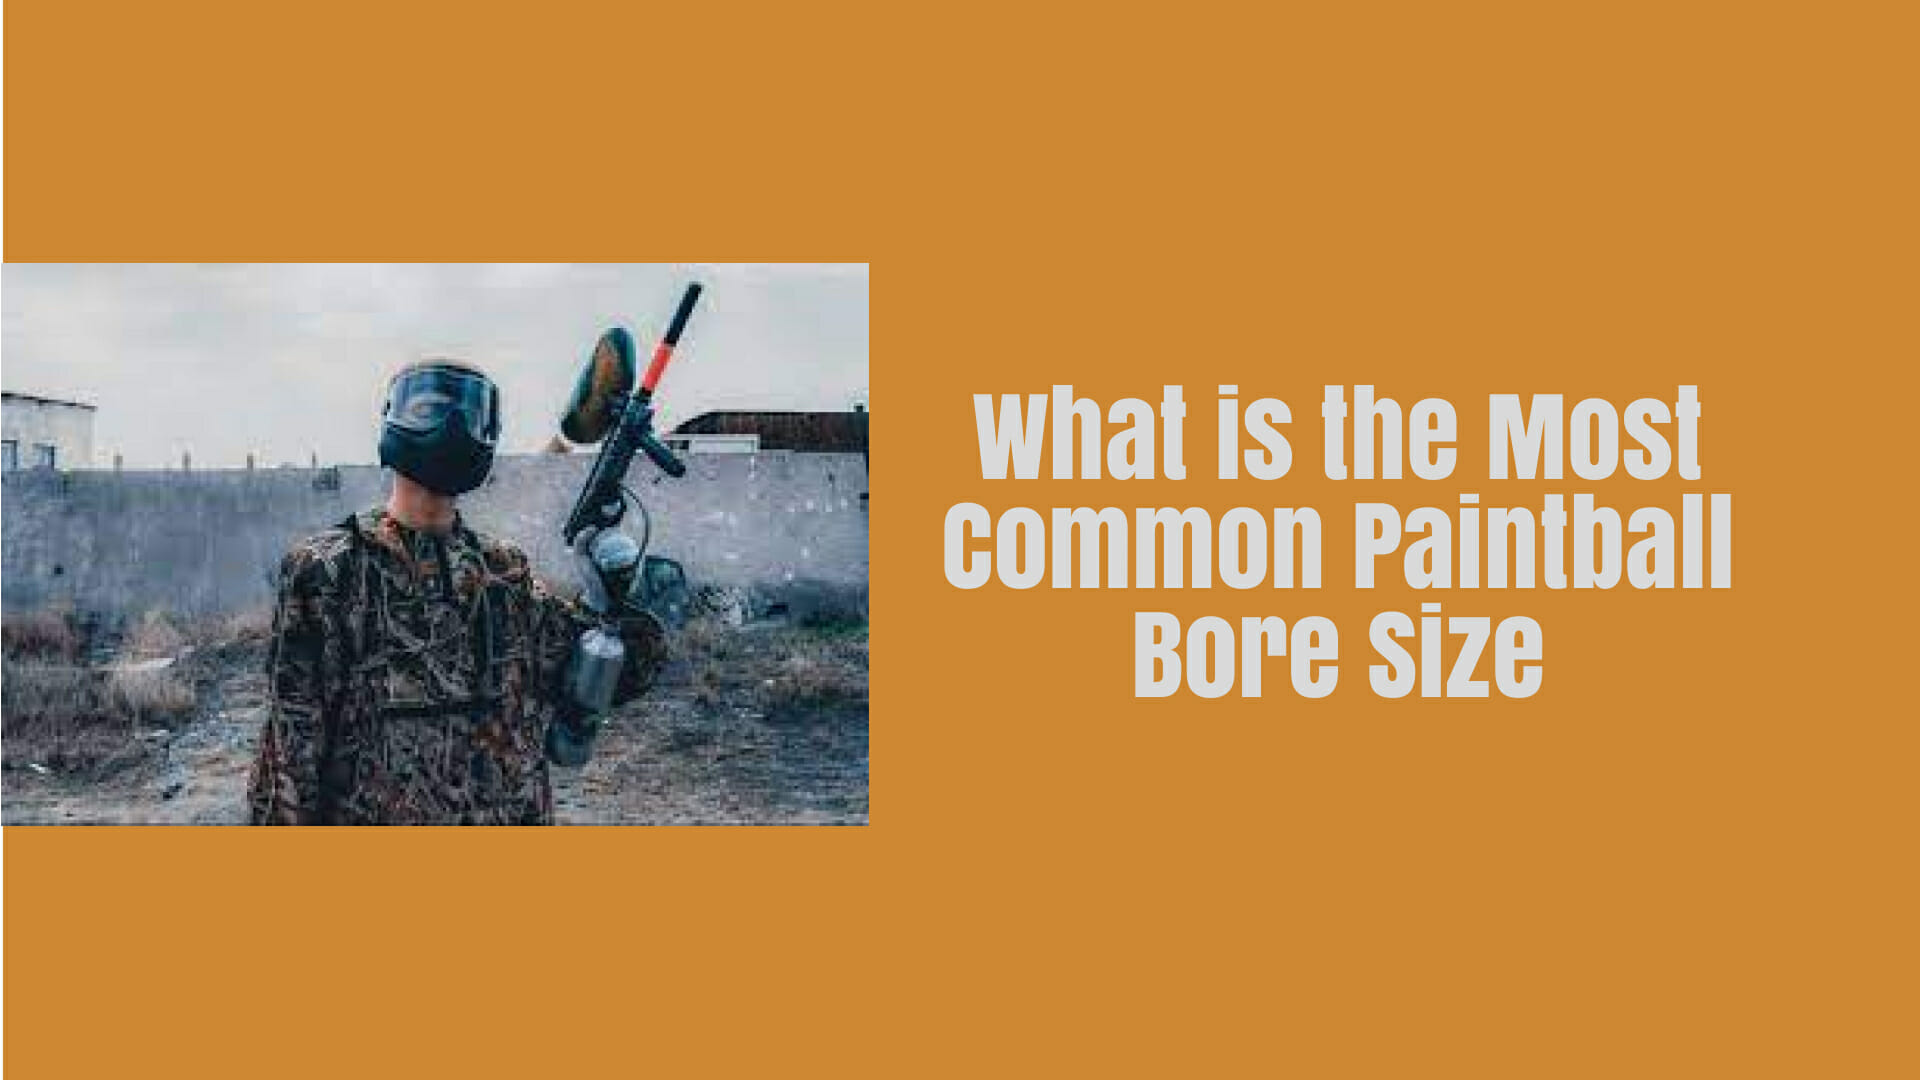 What is the Most Common Paintball Bore Size